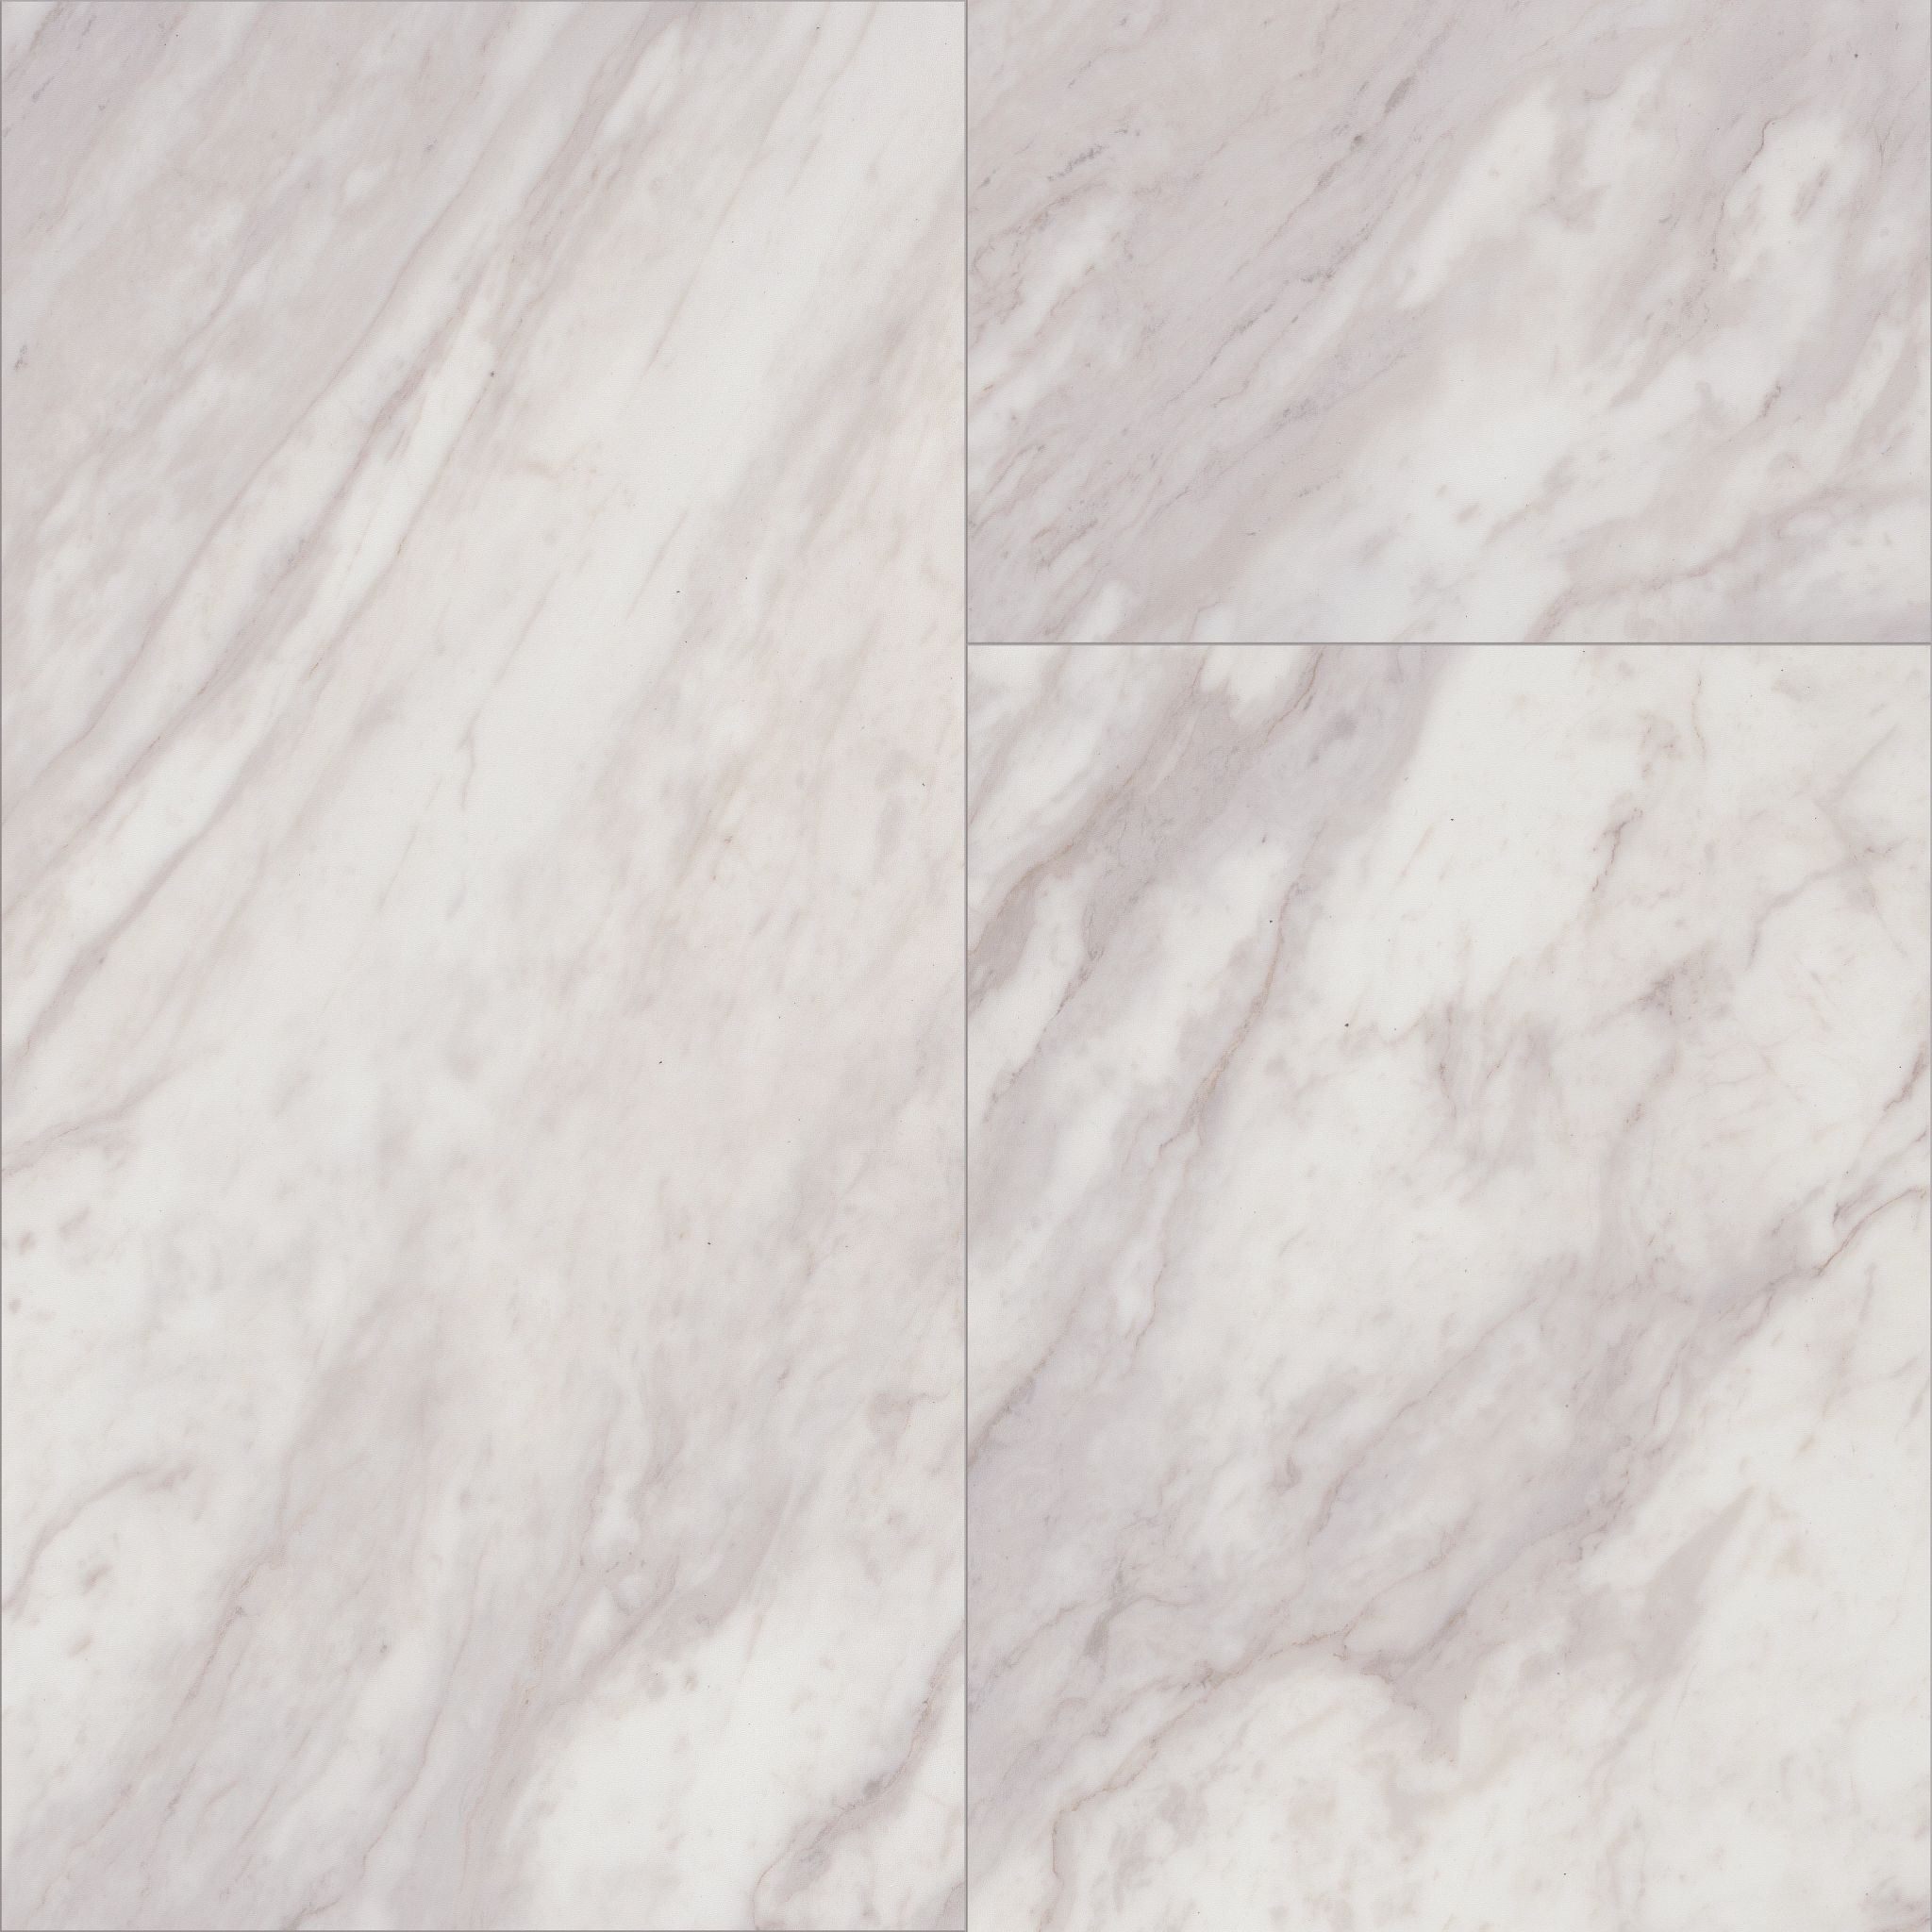 Style name and number: Paragon Tile Plus 1022V and color name and number: Oyster 01010